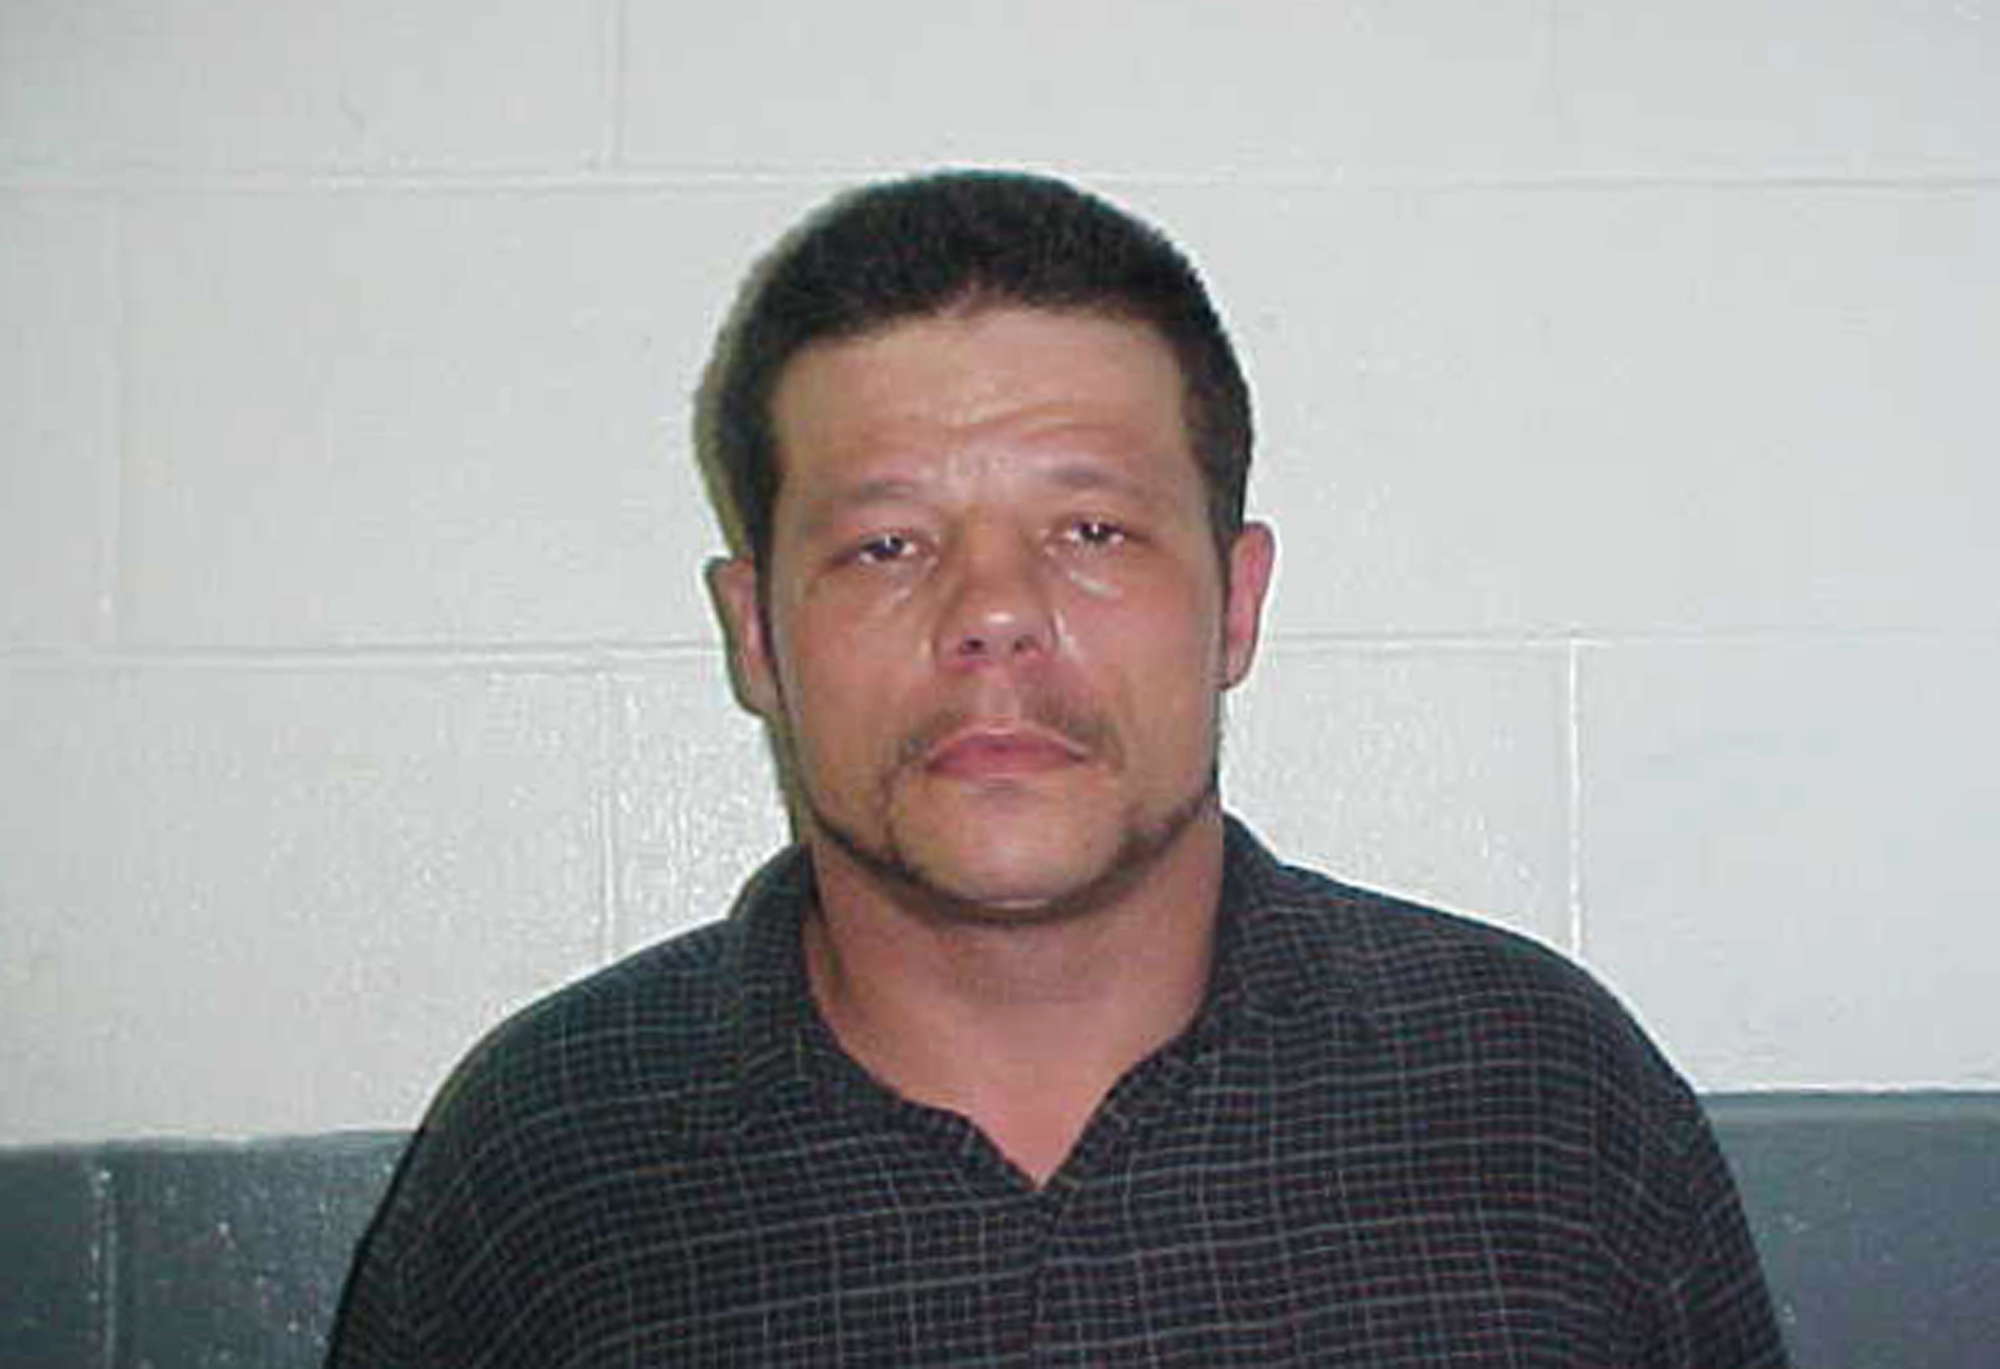 PHOTO: This June 8, 2010 photo provided by the Kay County Detention Center shows Michael Vance.